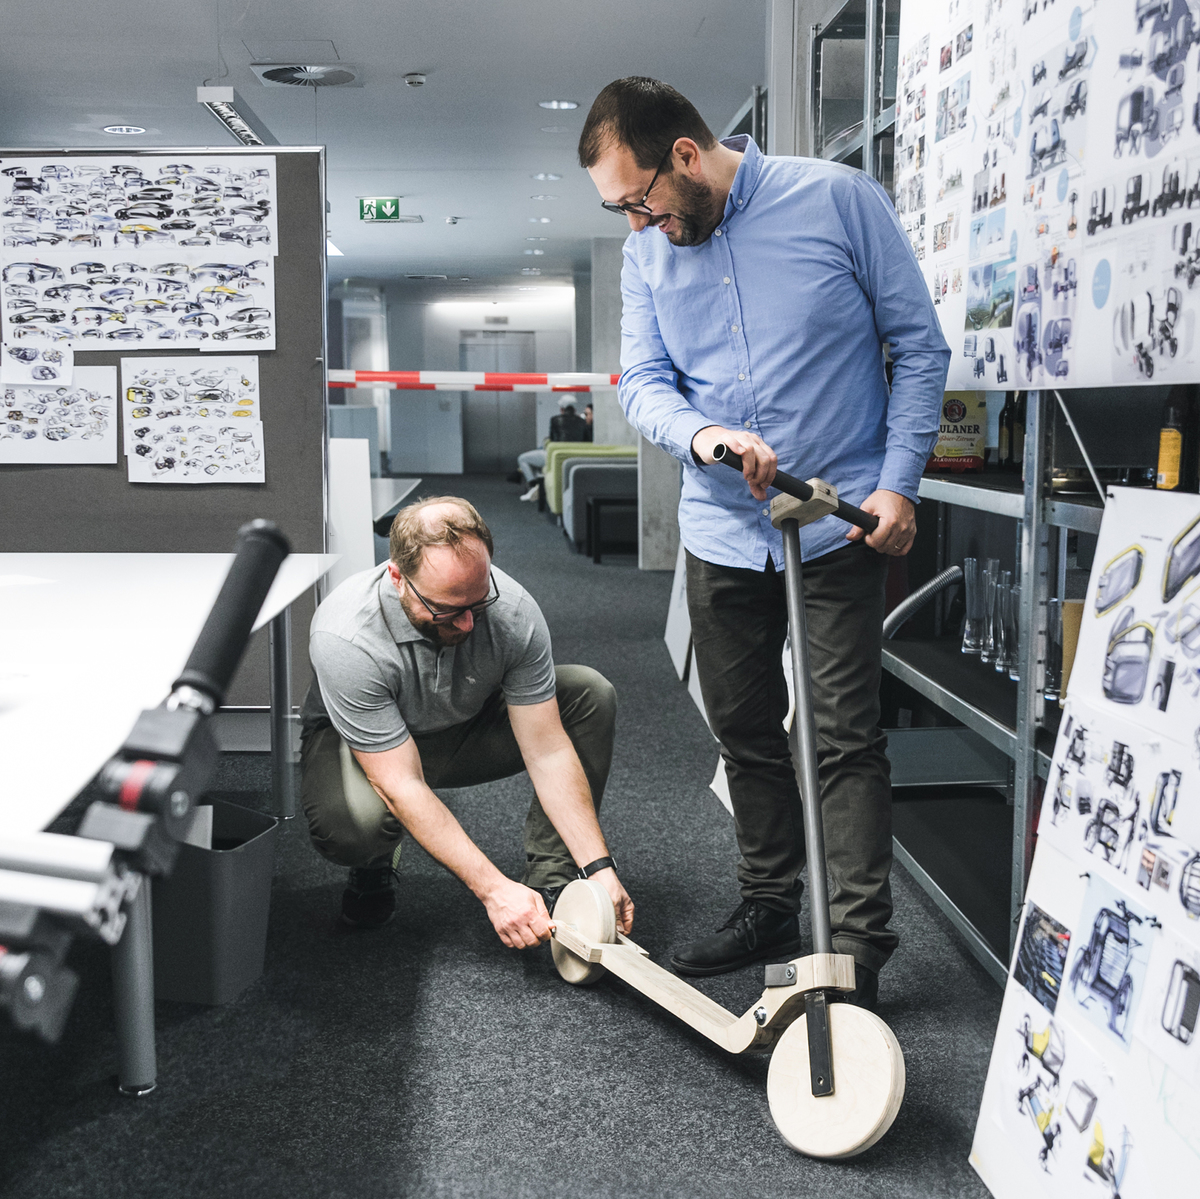 Sebastien with future mobility scooter prototype